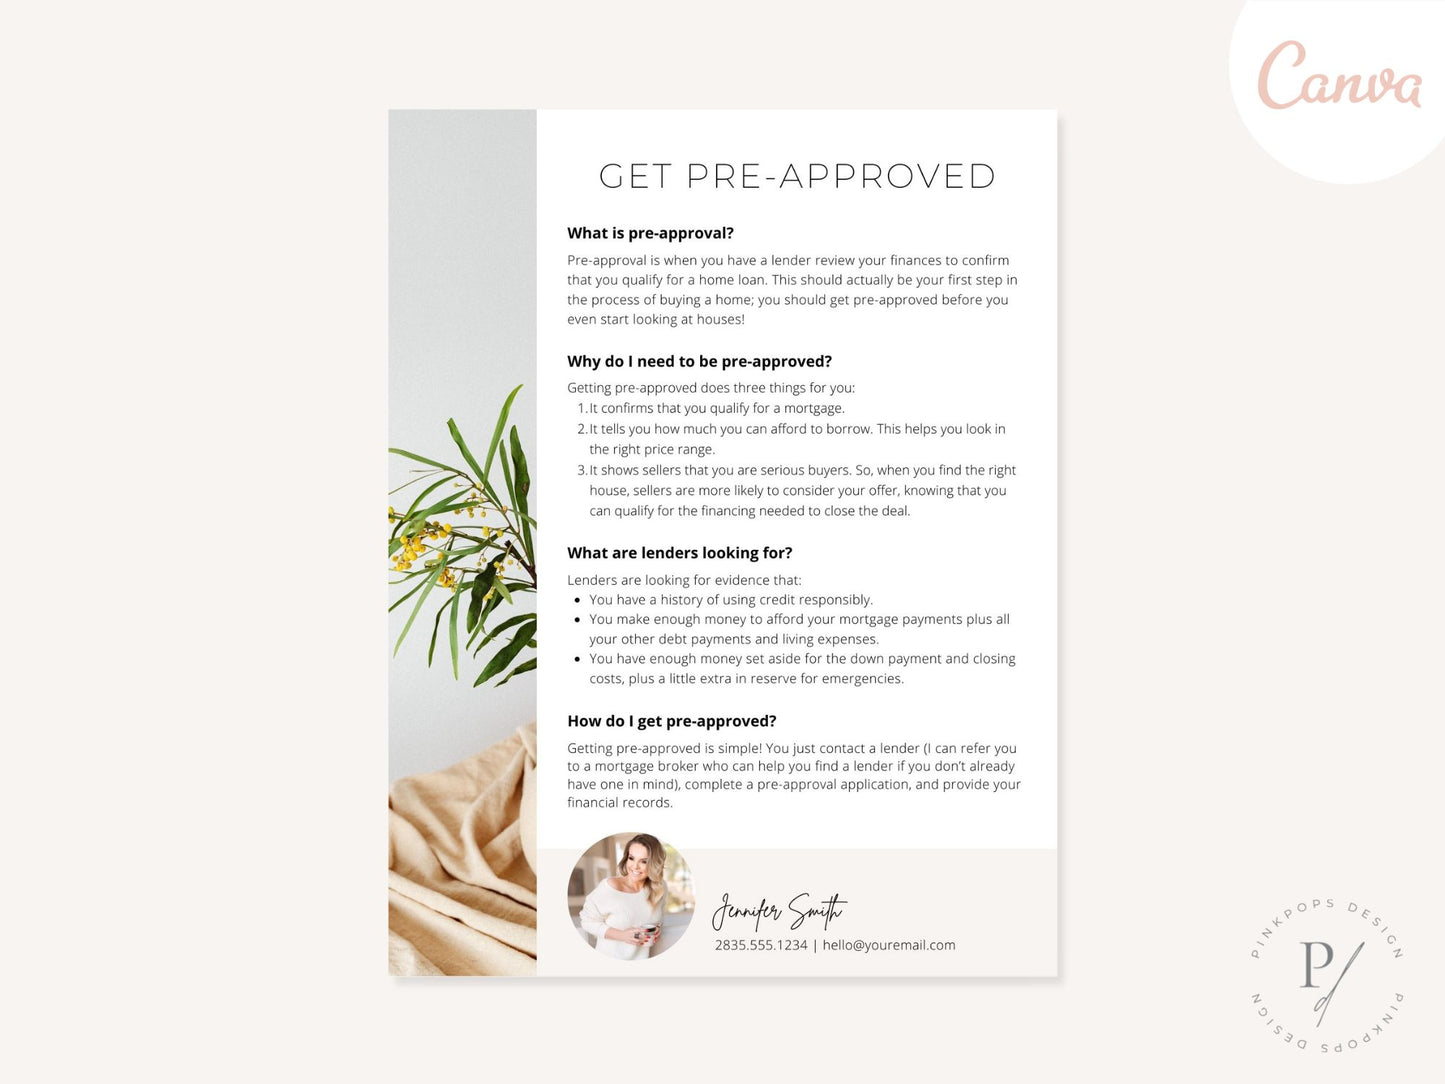 Minimal Get Pre-Approved Flyer - Sleek mortgage marketing tool for an efficient and hassle-free pre-approval process.